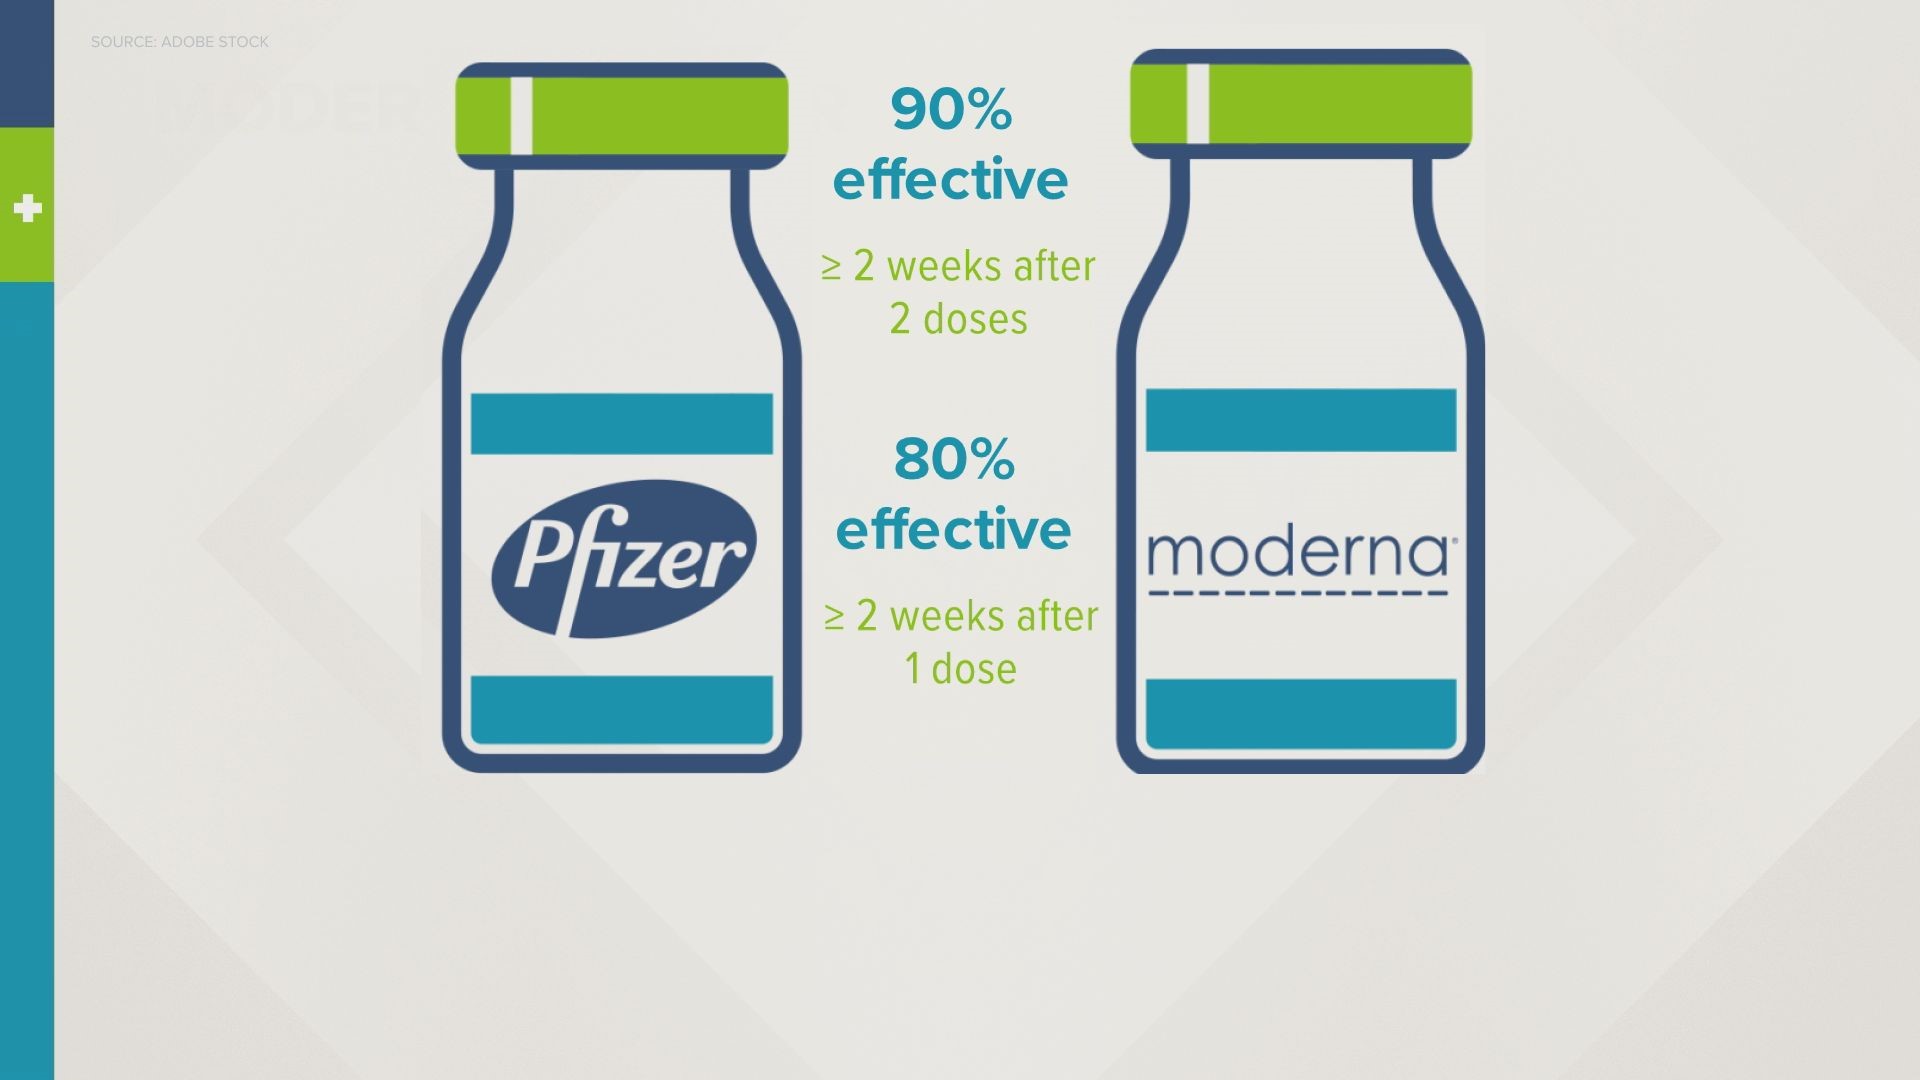 If you get the Pfizer or Moderna vaccine, experts say you shouldn't pass on your second dose.